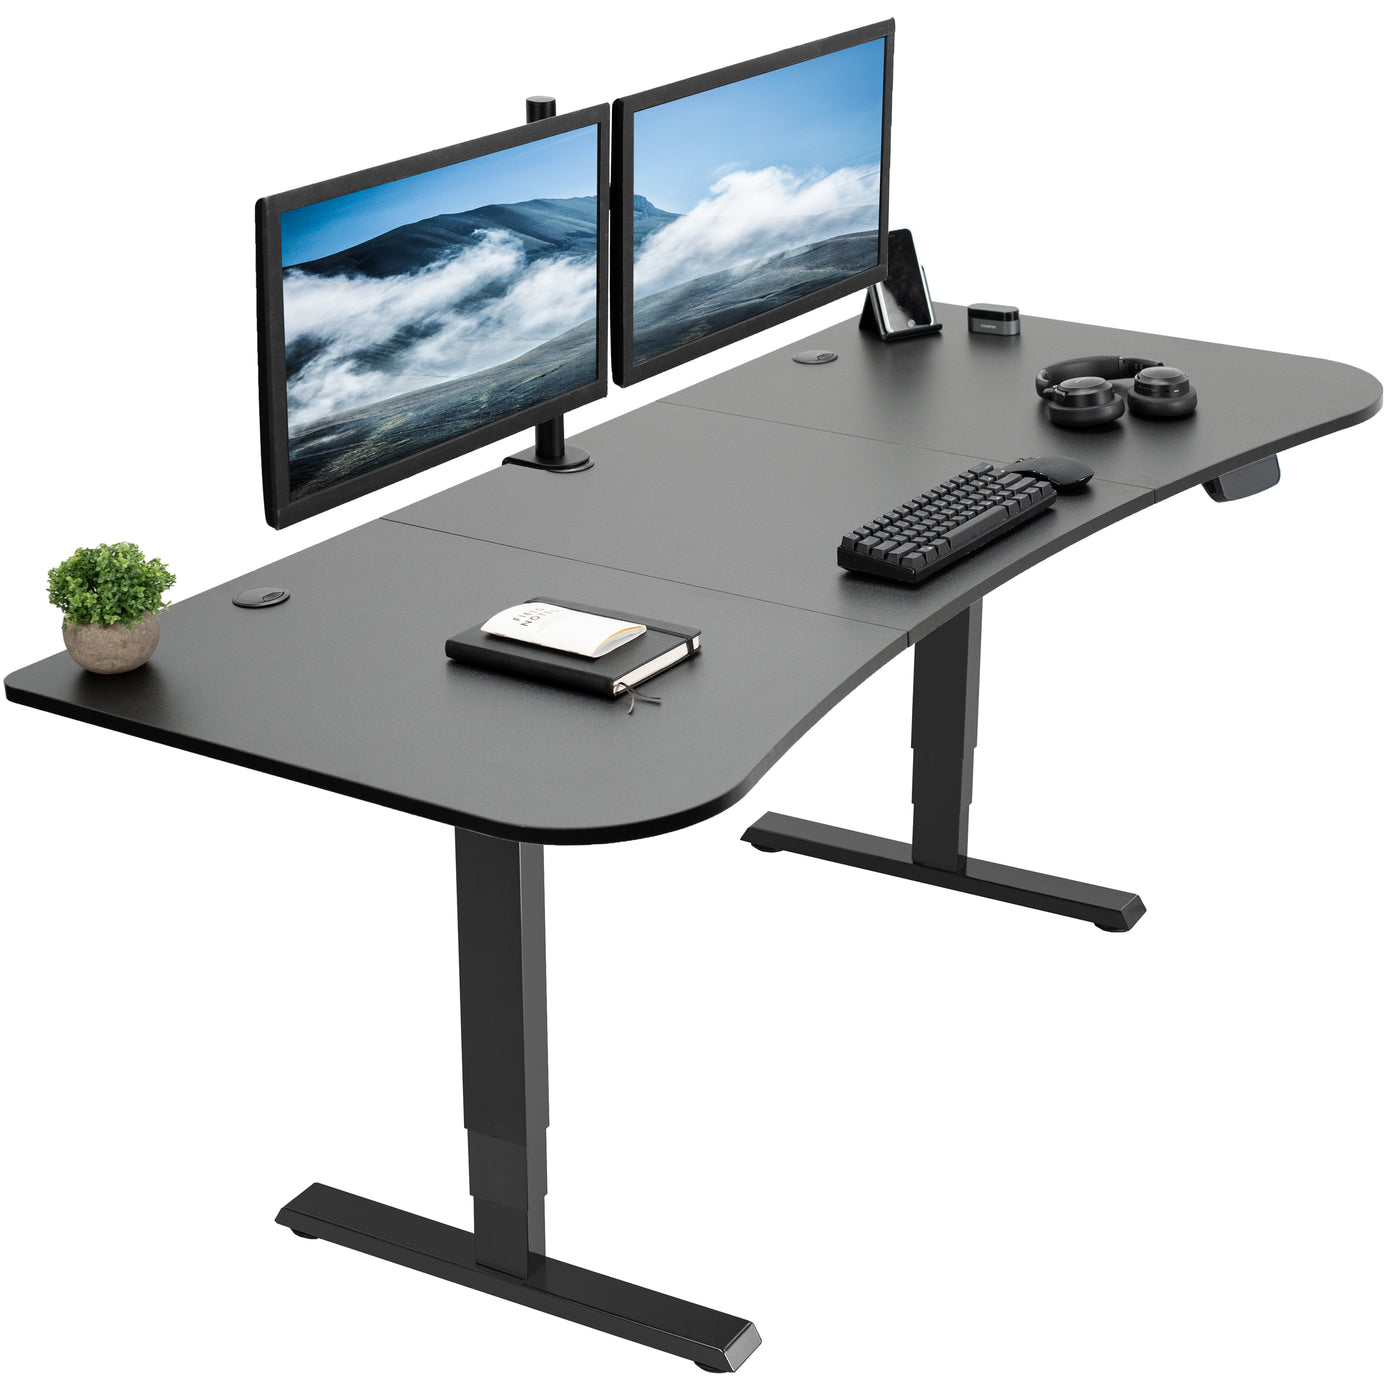 Large three-panel electric black desk top and frame.